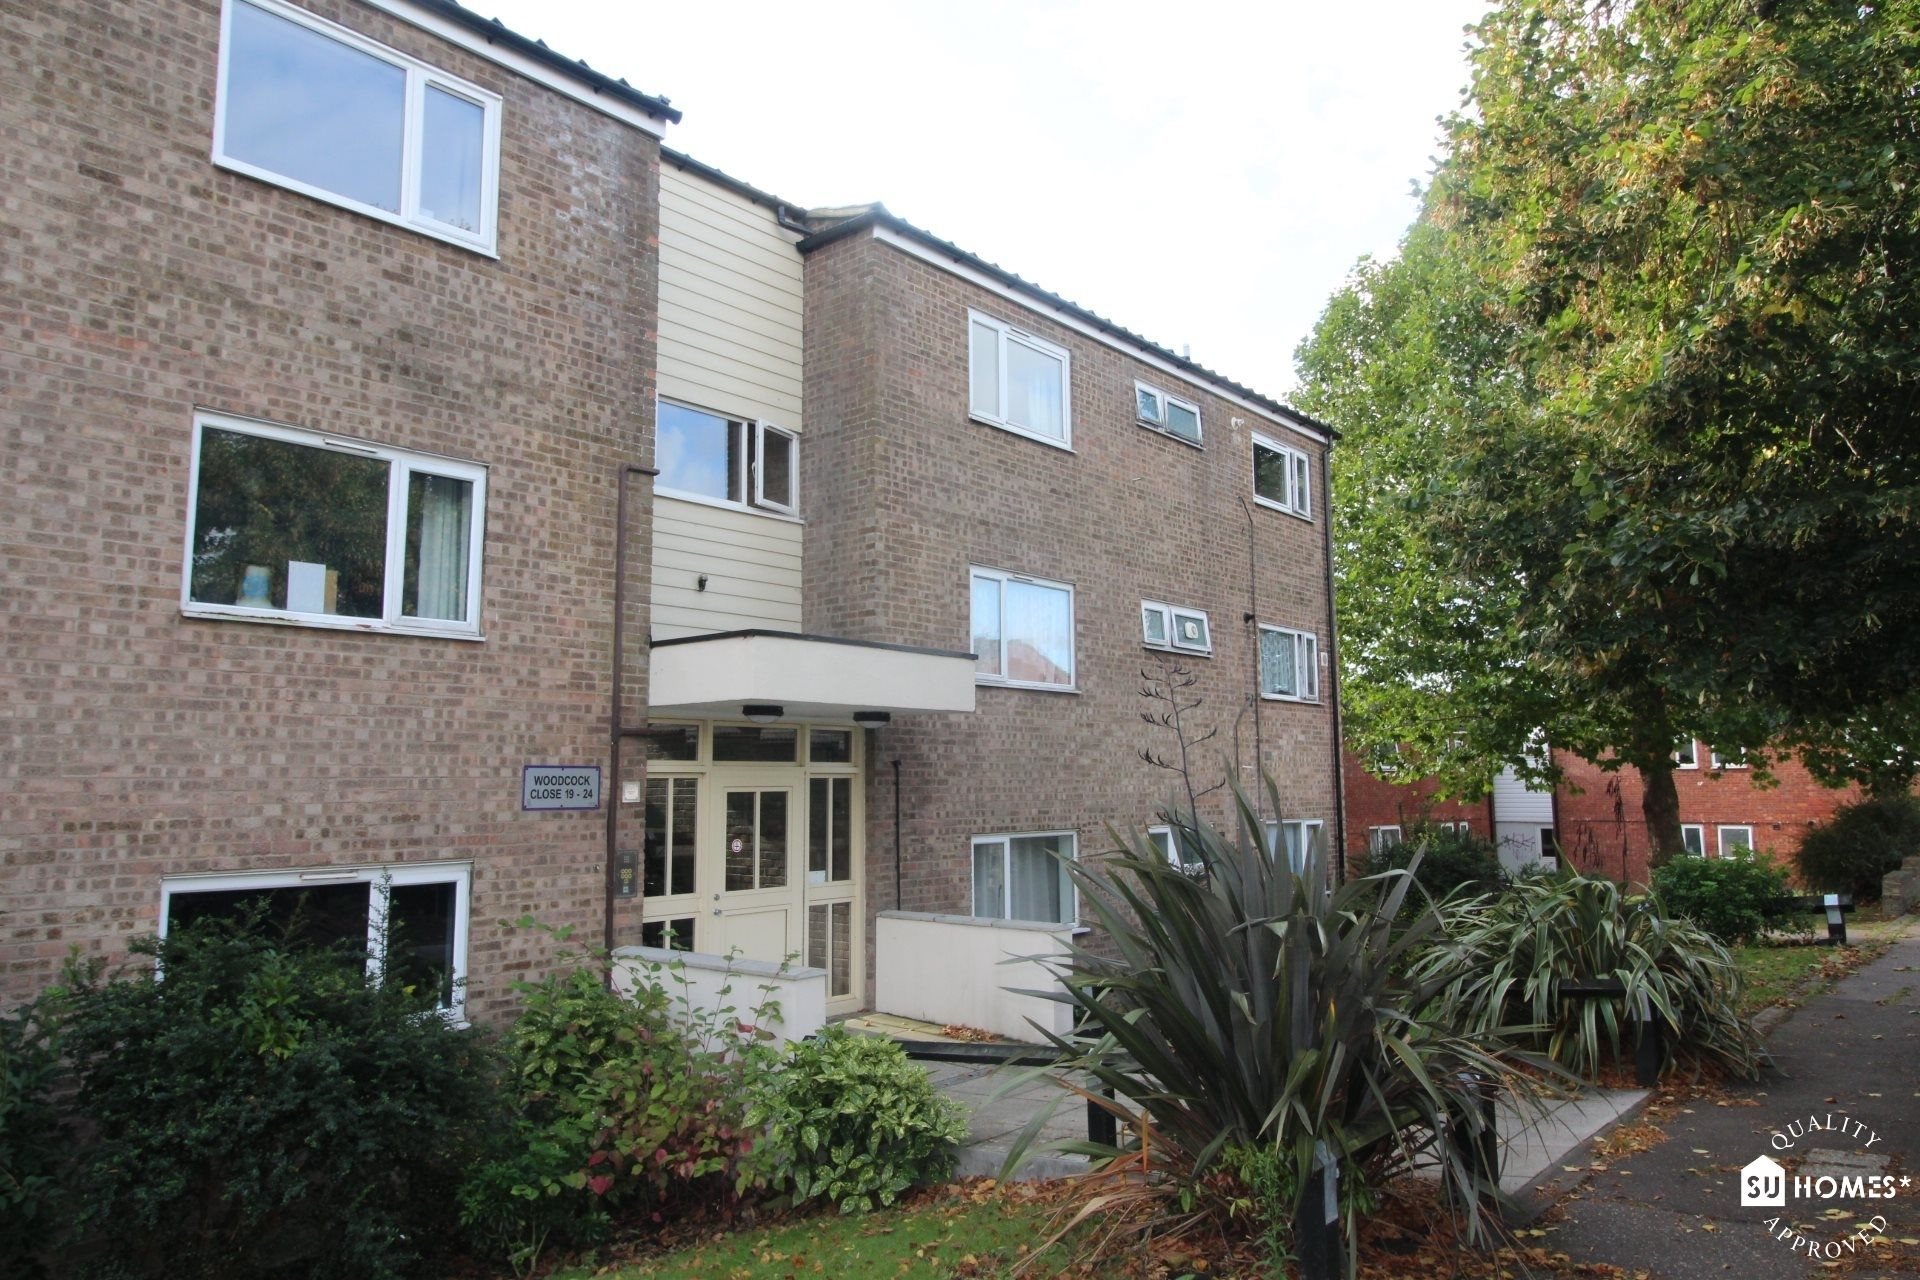 3 bed flat to rent in Woodcock Close, Colchester, CO4 